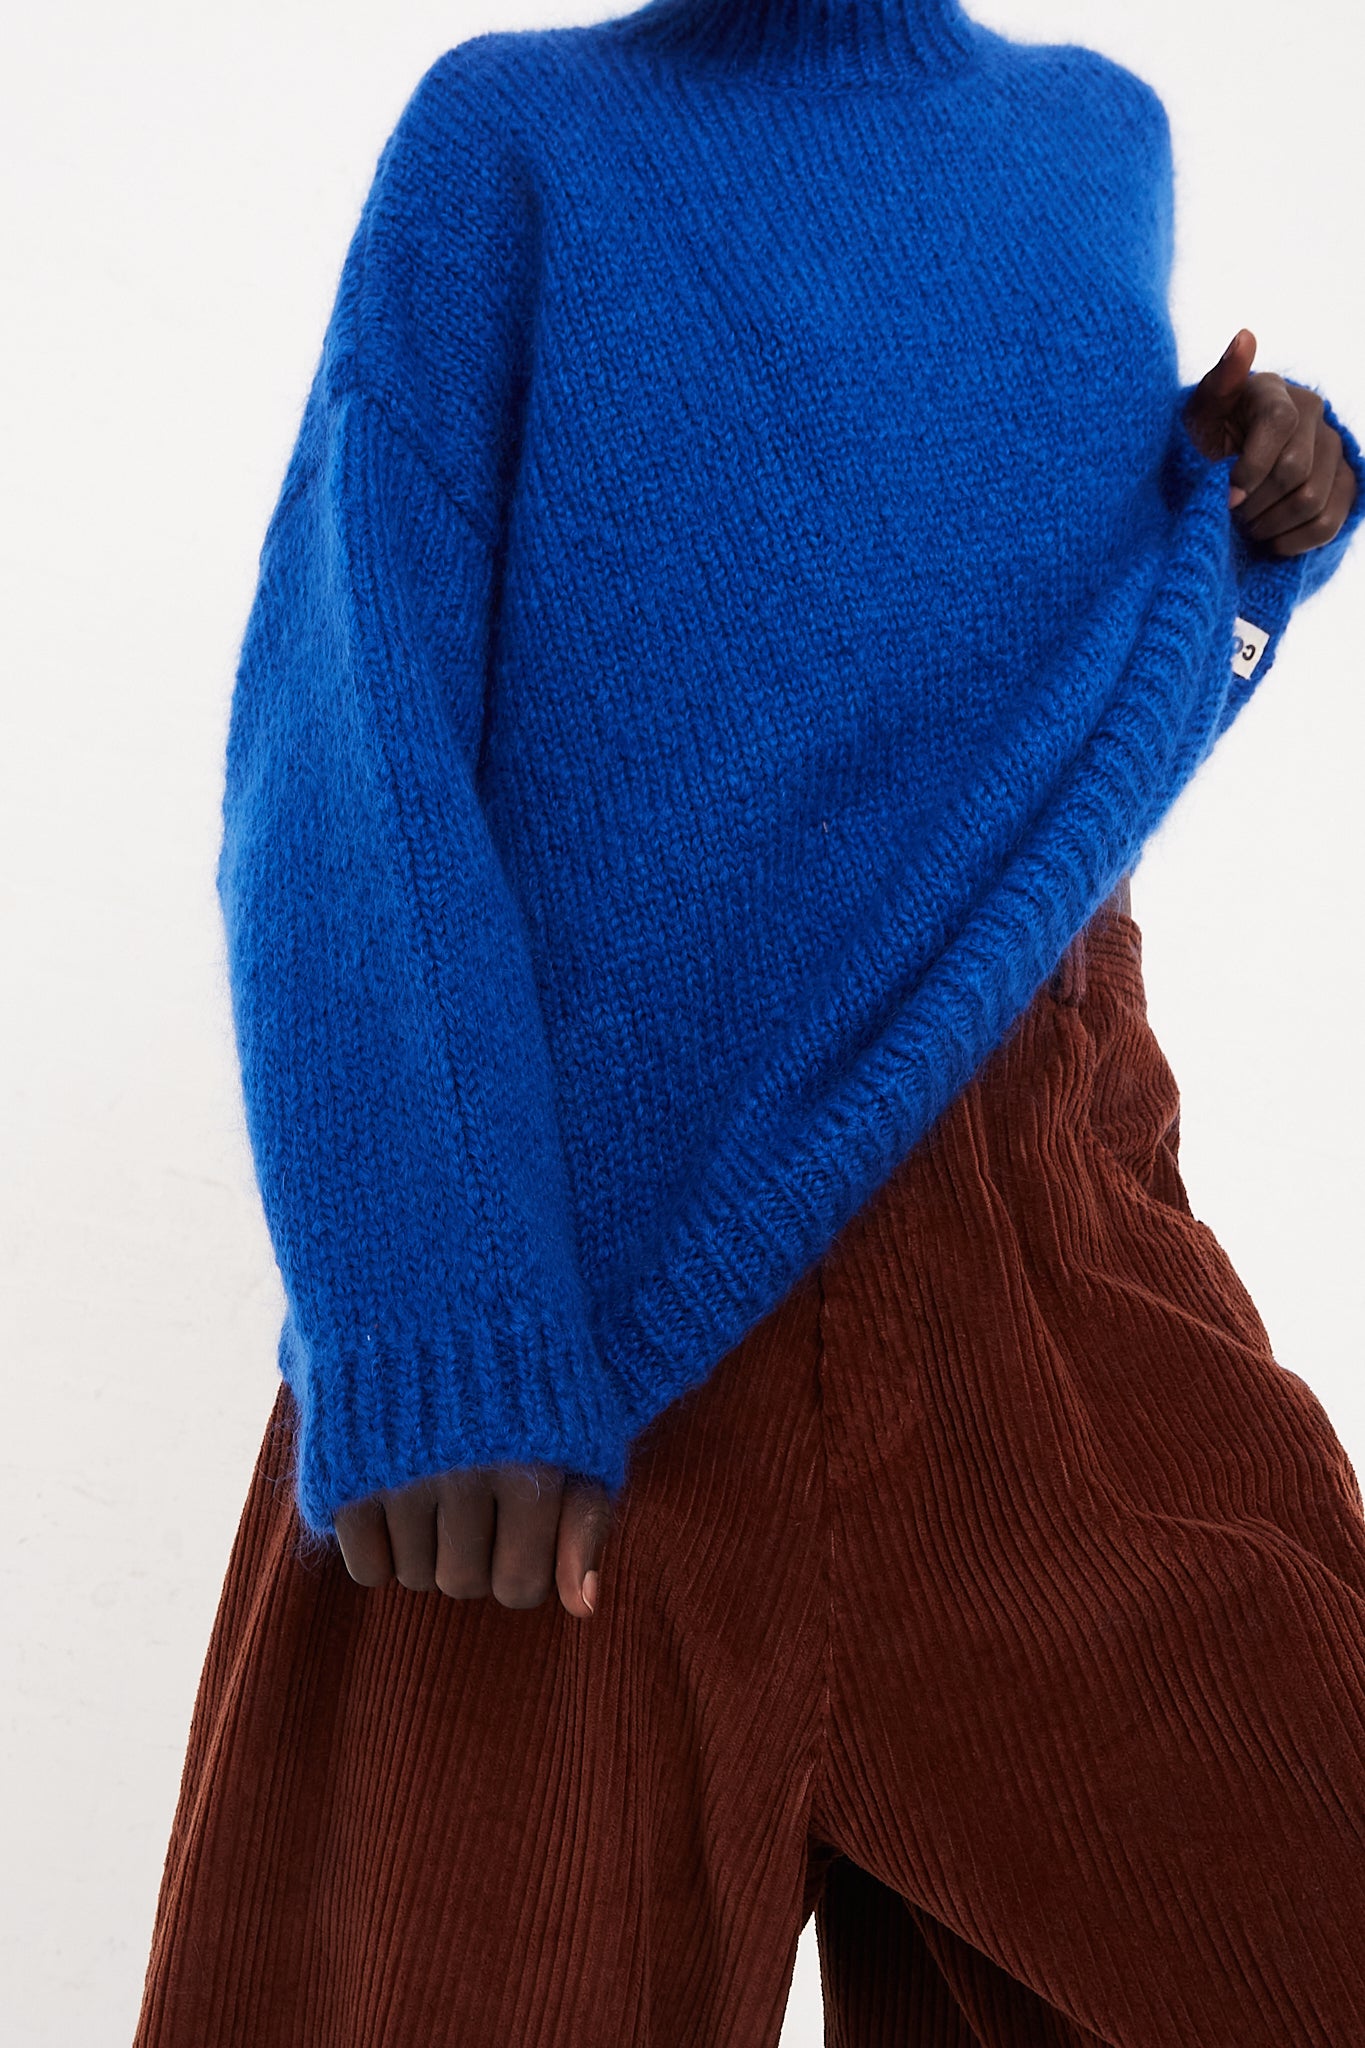 CORDERA Mohair Sweater in Blue | Oroboro Store | Front view of sweater upclose to show details on model